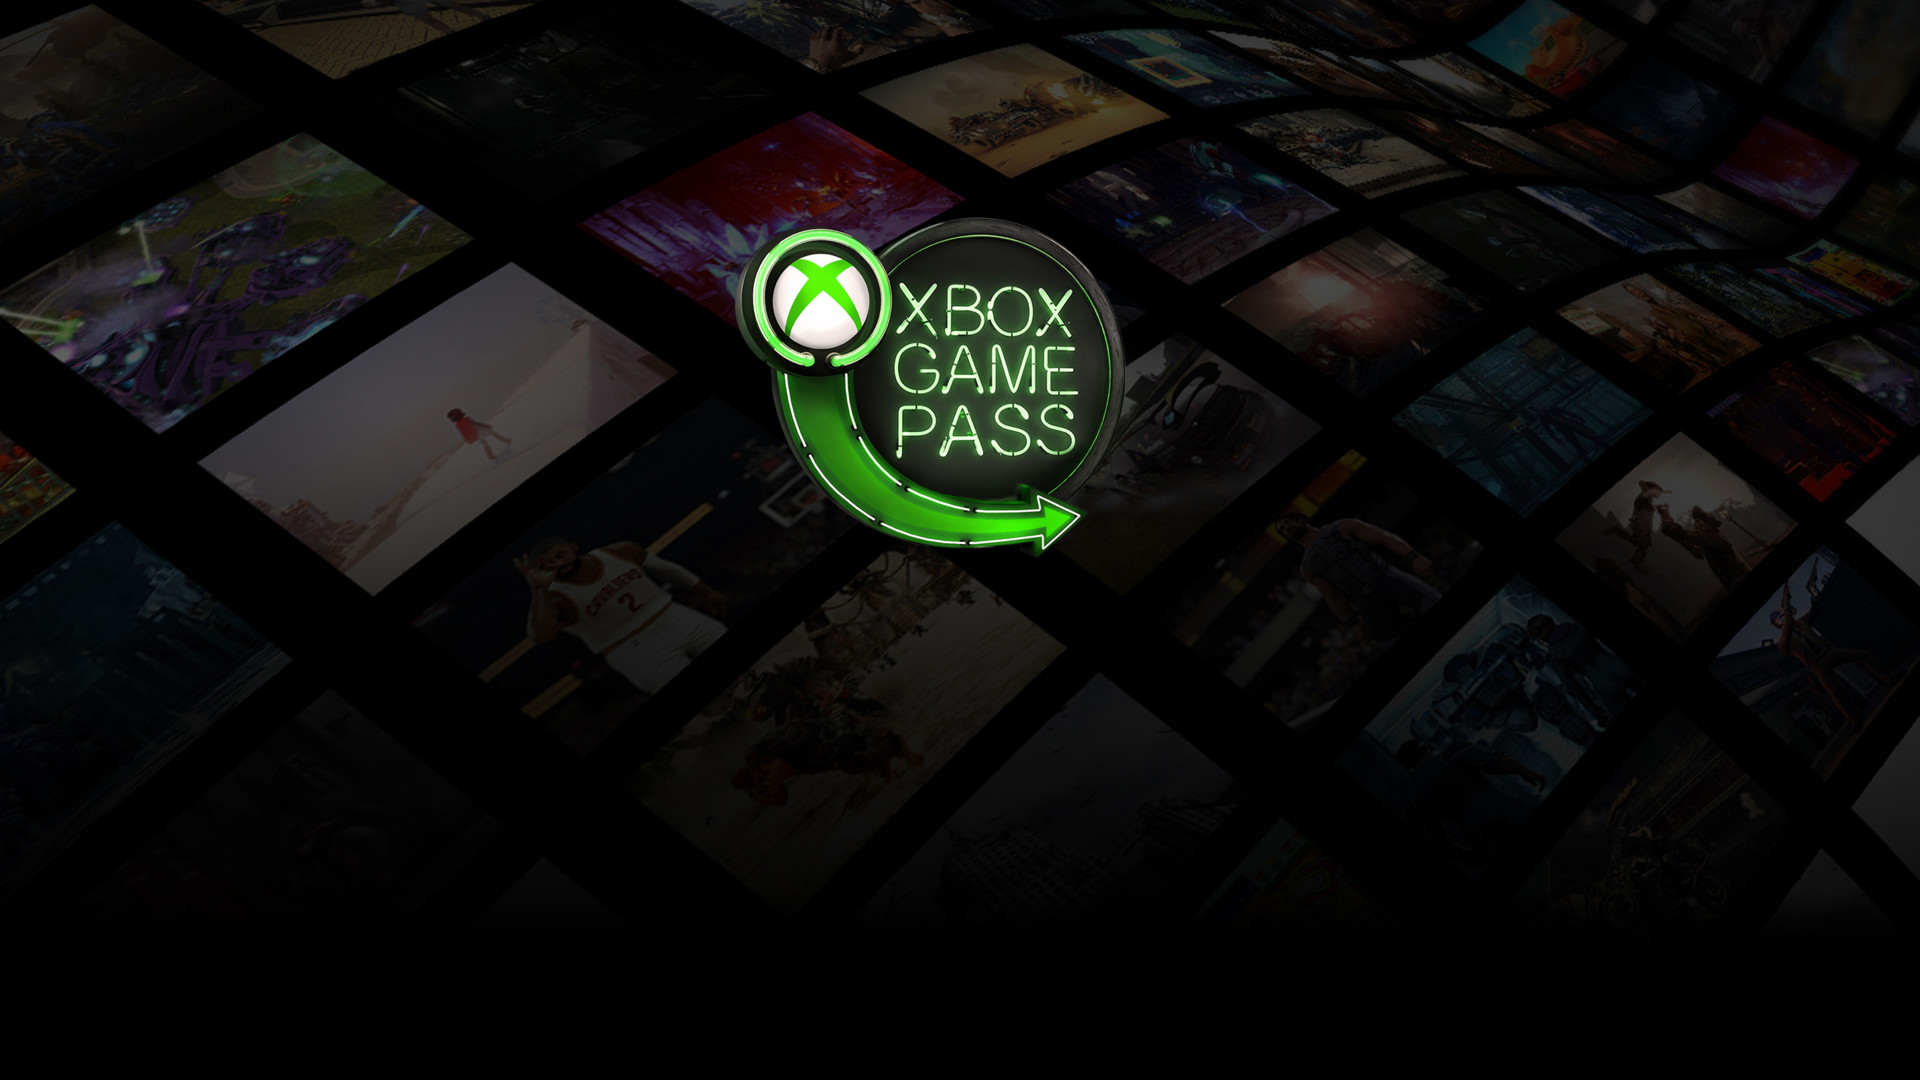 ultimate game pass xbox price for a year